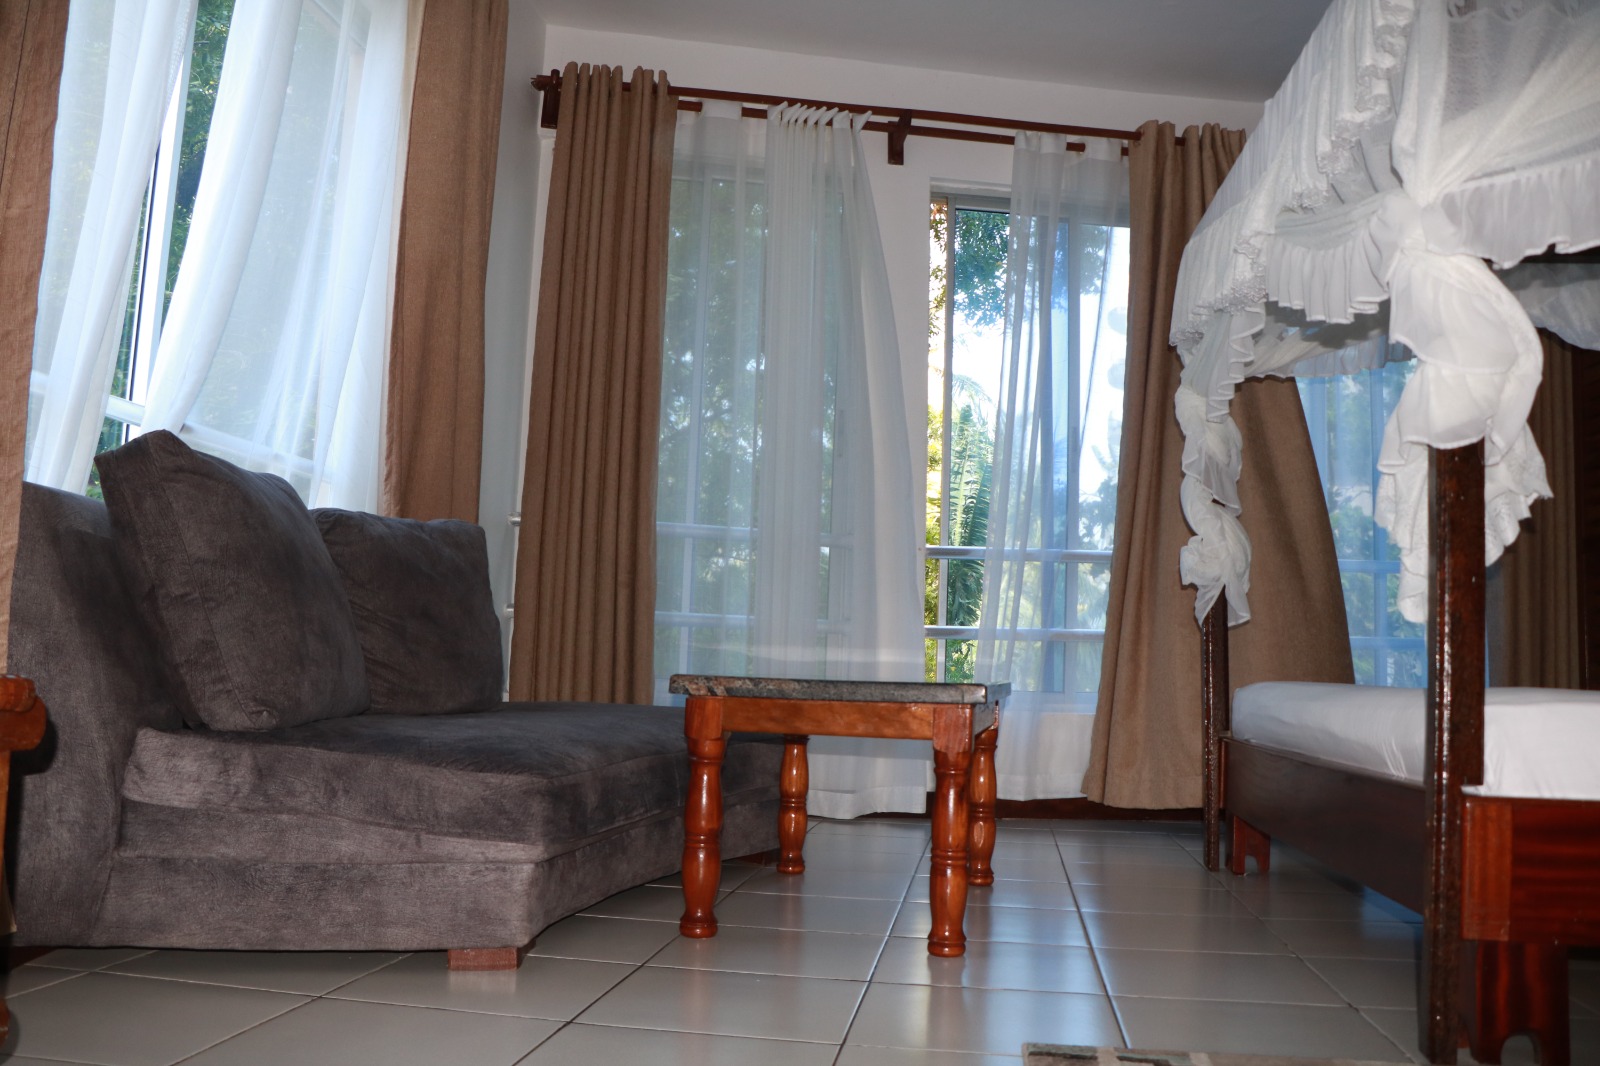 Two-bedroom with Ocean View Near Nyali Mombasa. Affordable furnished Apartment for vacation in Mombasa | Zuru Life Africa